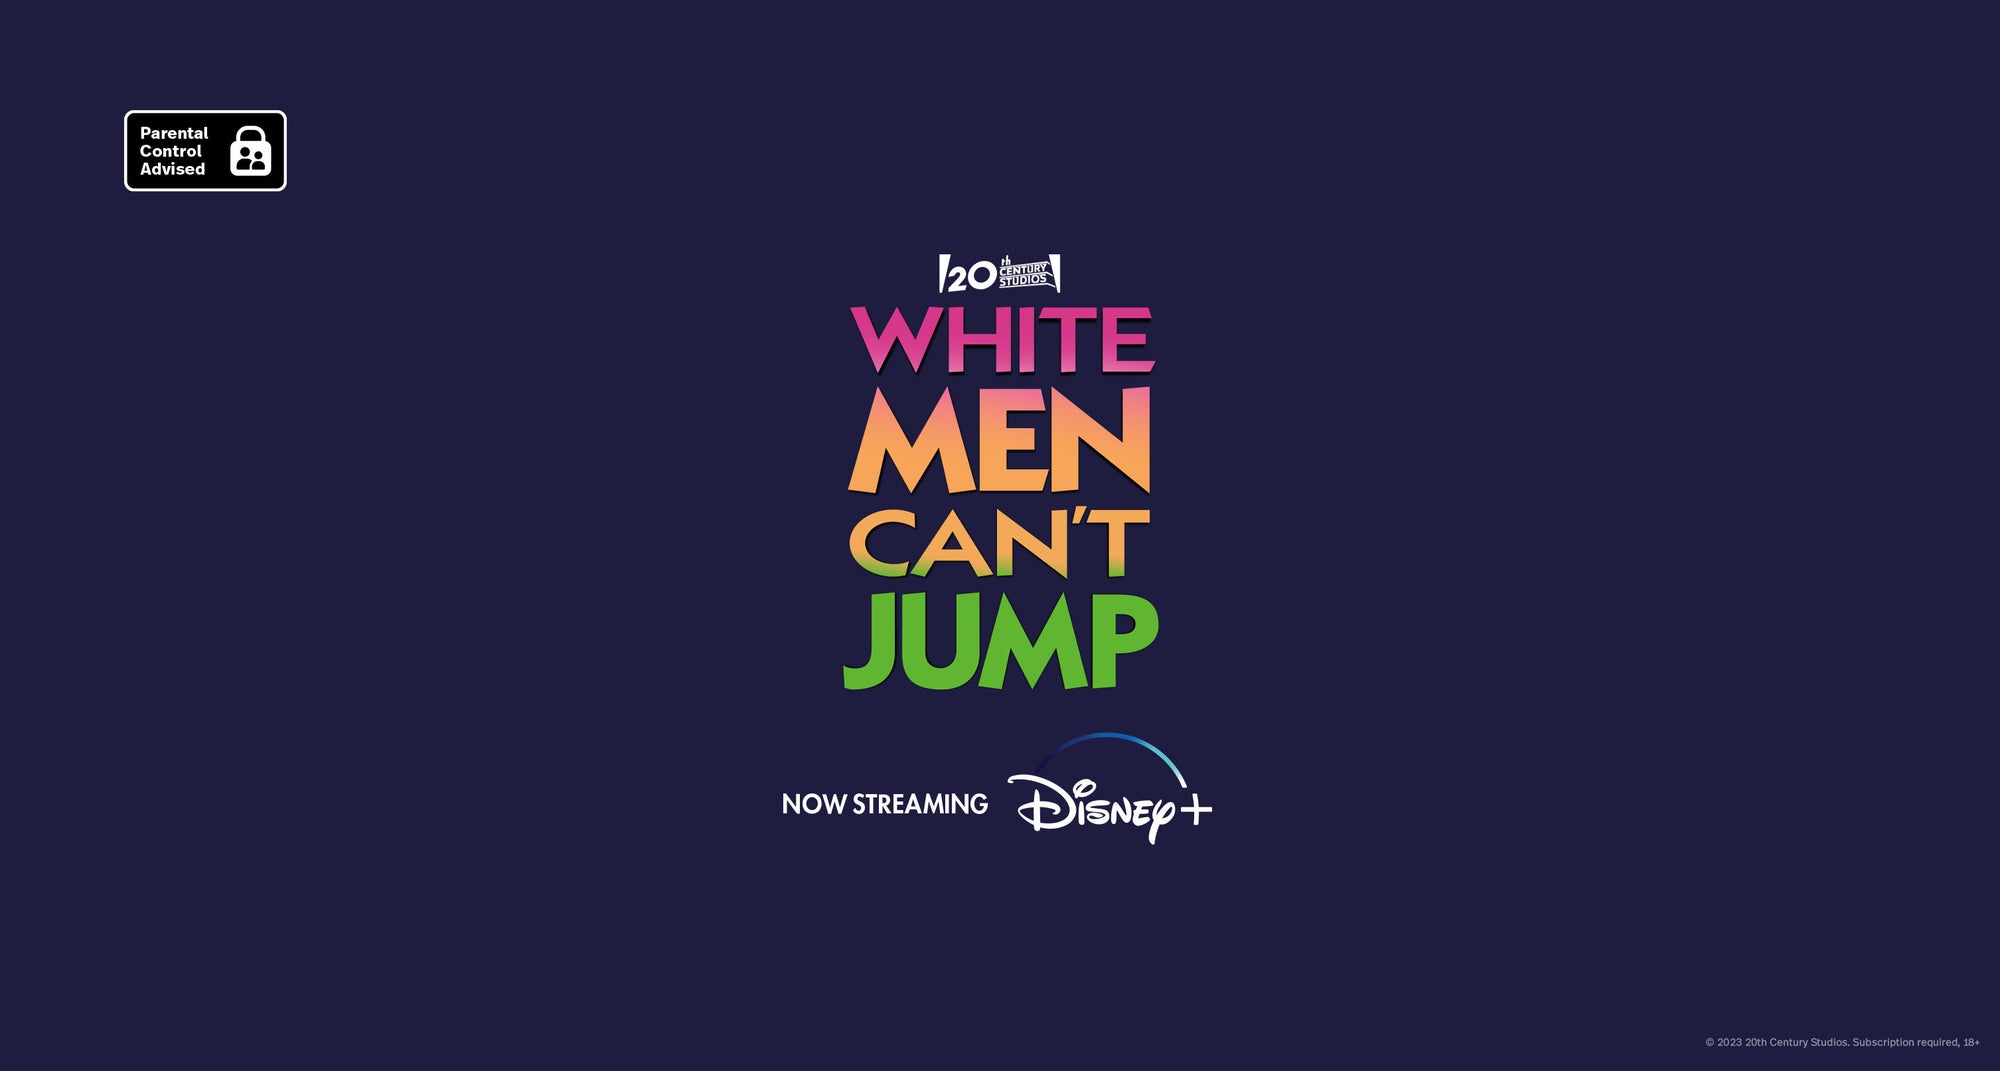 20th Century Studios’ 'White Men Can't Jump' Revisits a Cult-Classic, Now Streaming on Disney+